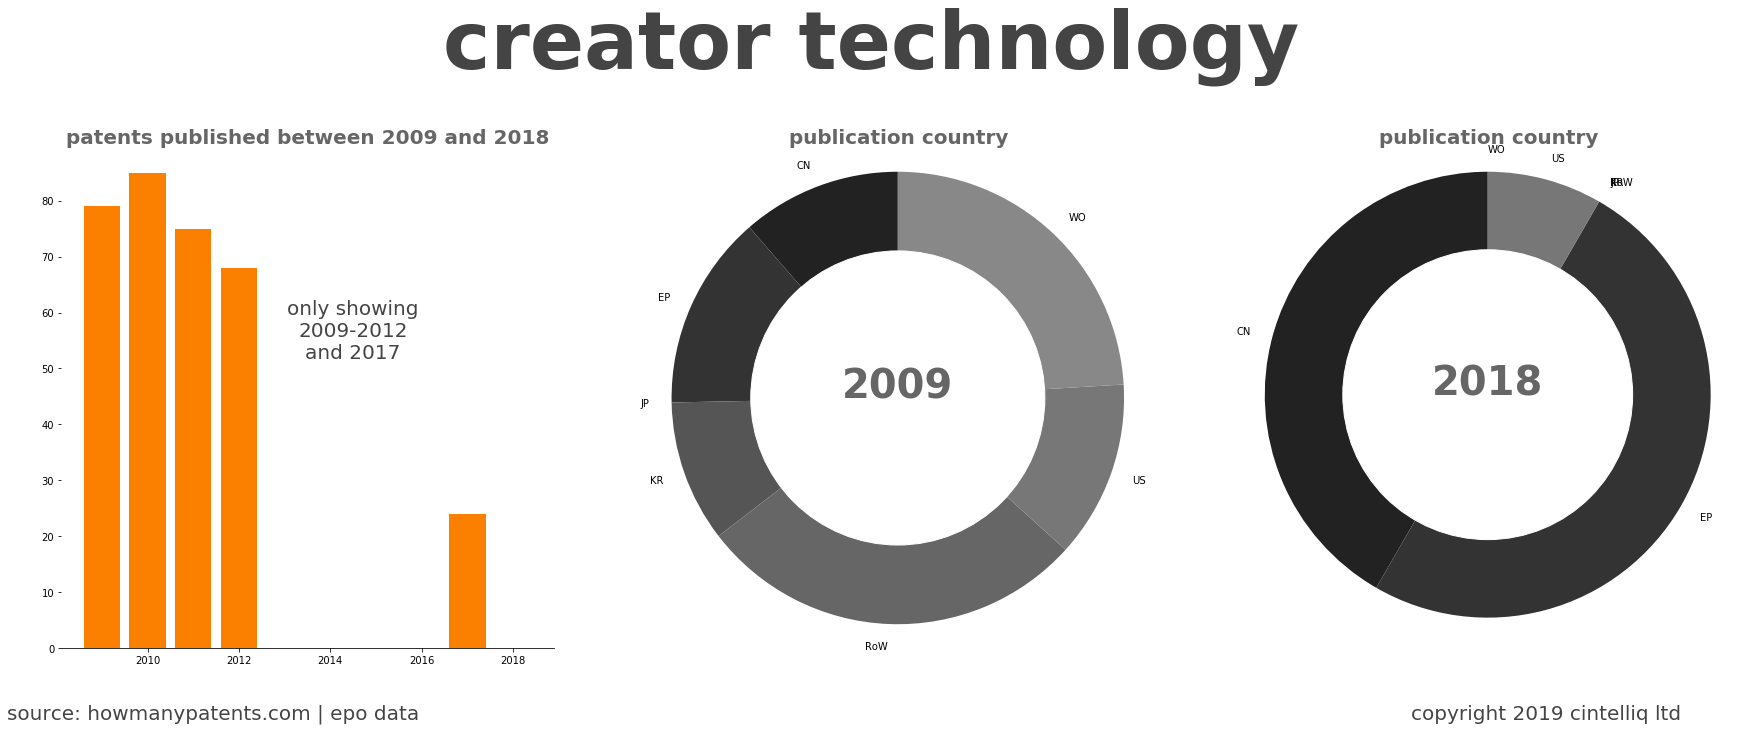 summary of patents for Creator Technology